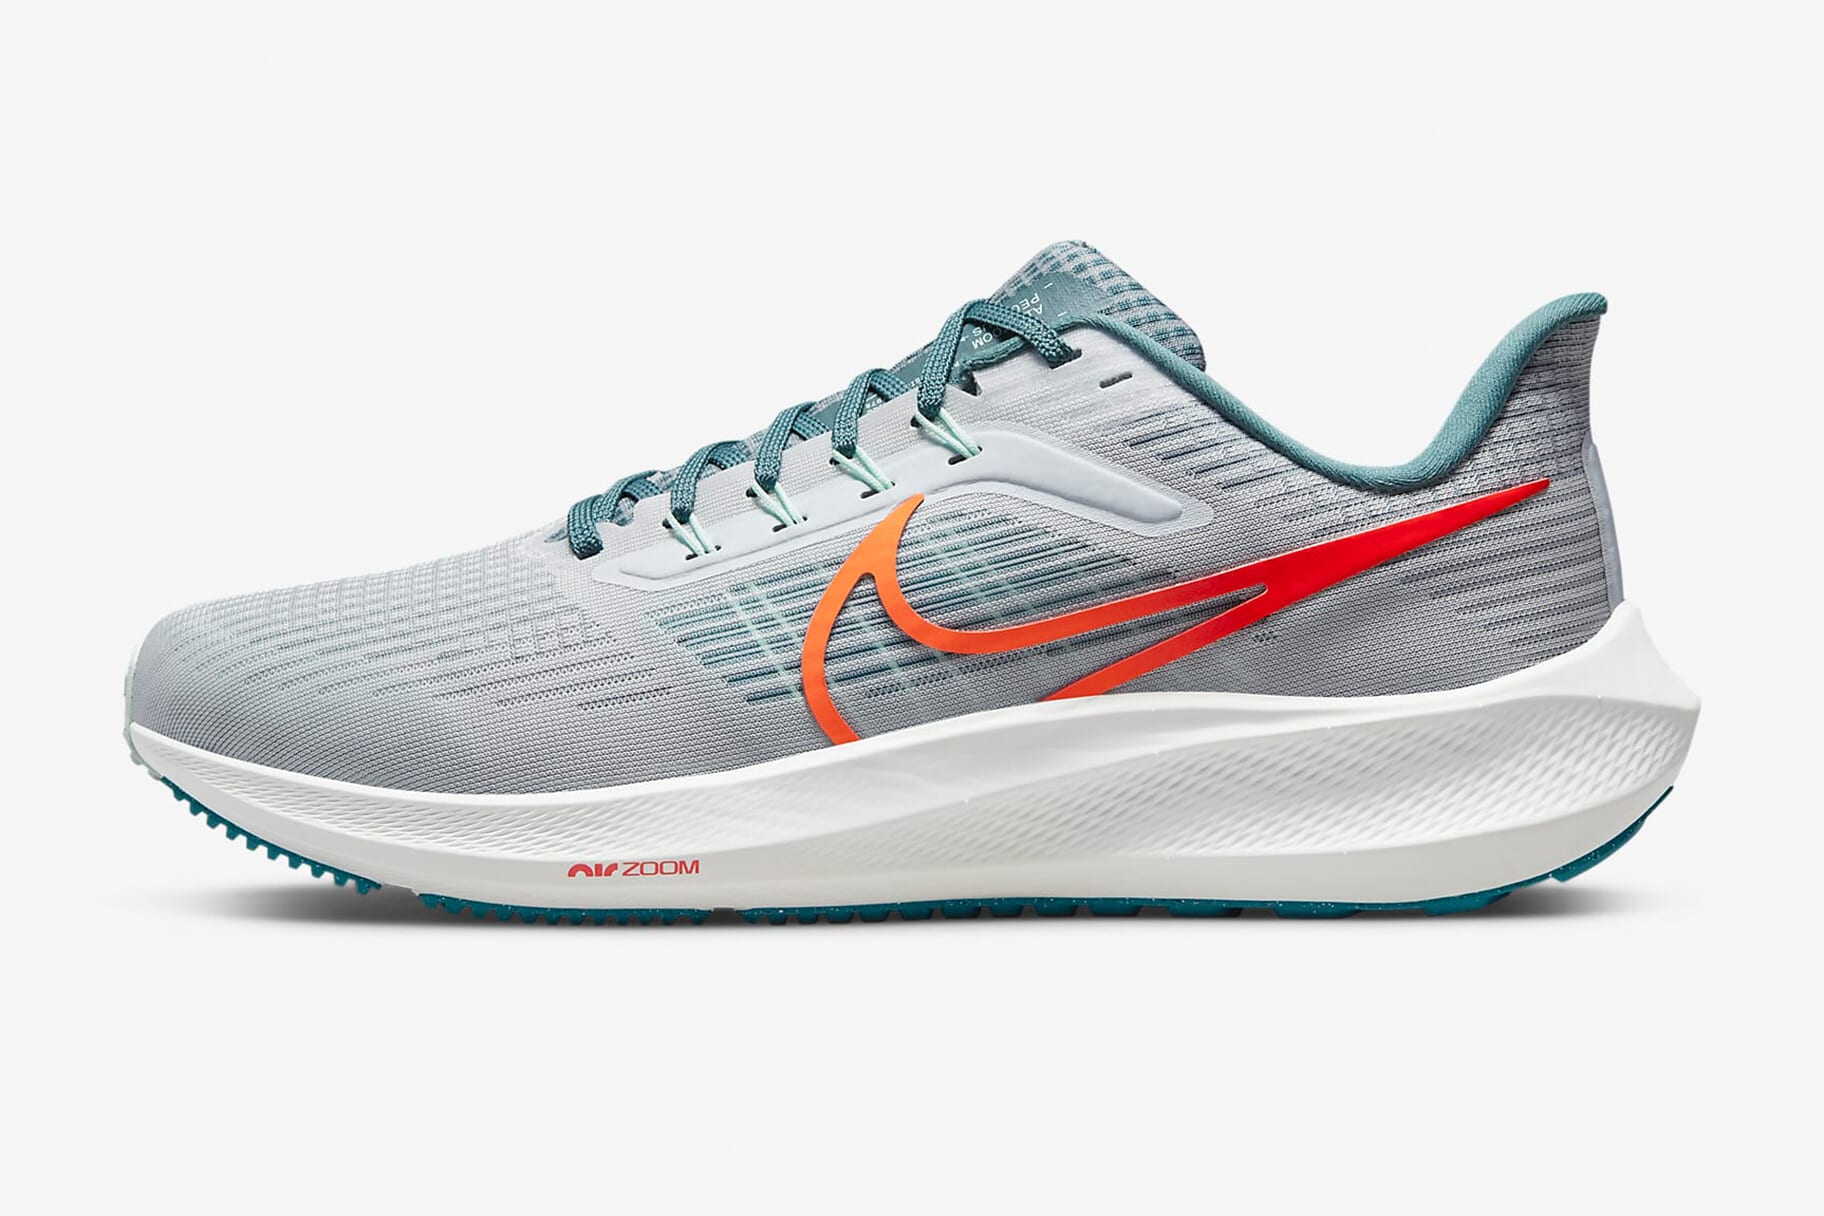 The Best Nike Running Shoes for Cross 